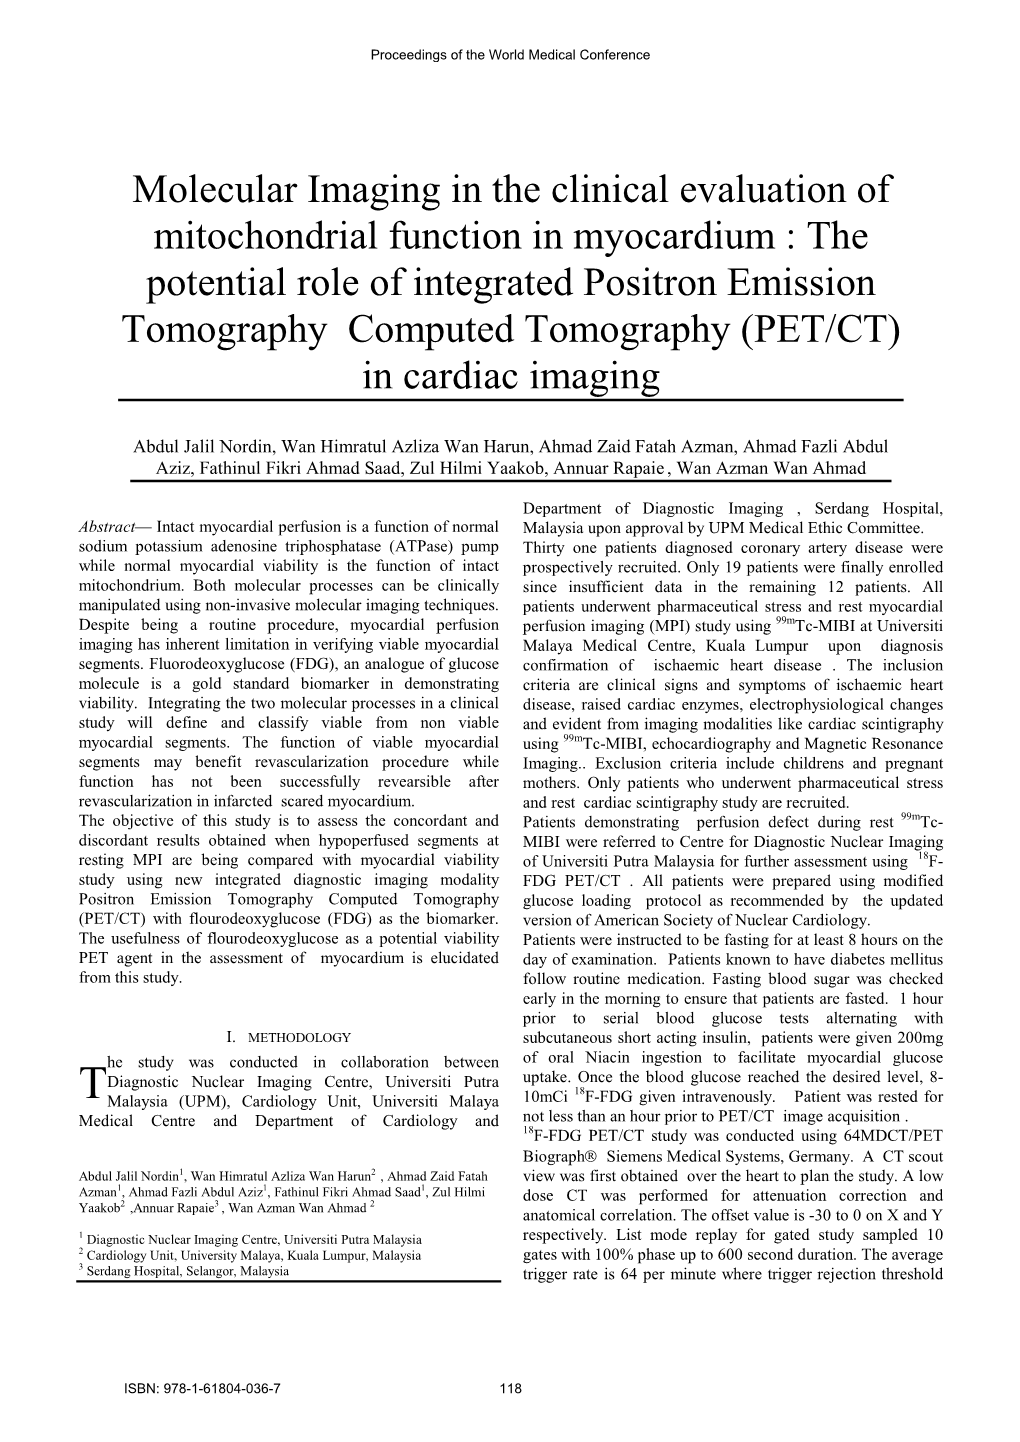 Molecular Imaging in the Clinical Evaluation of Mitochondrial Function in Myocardium